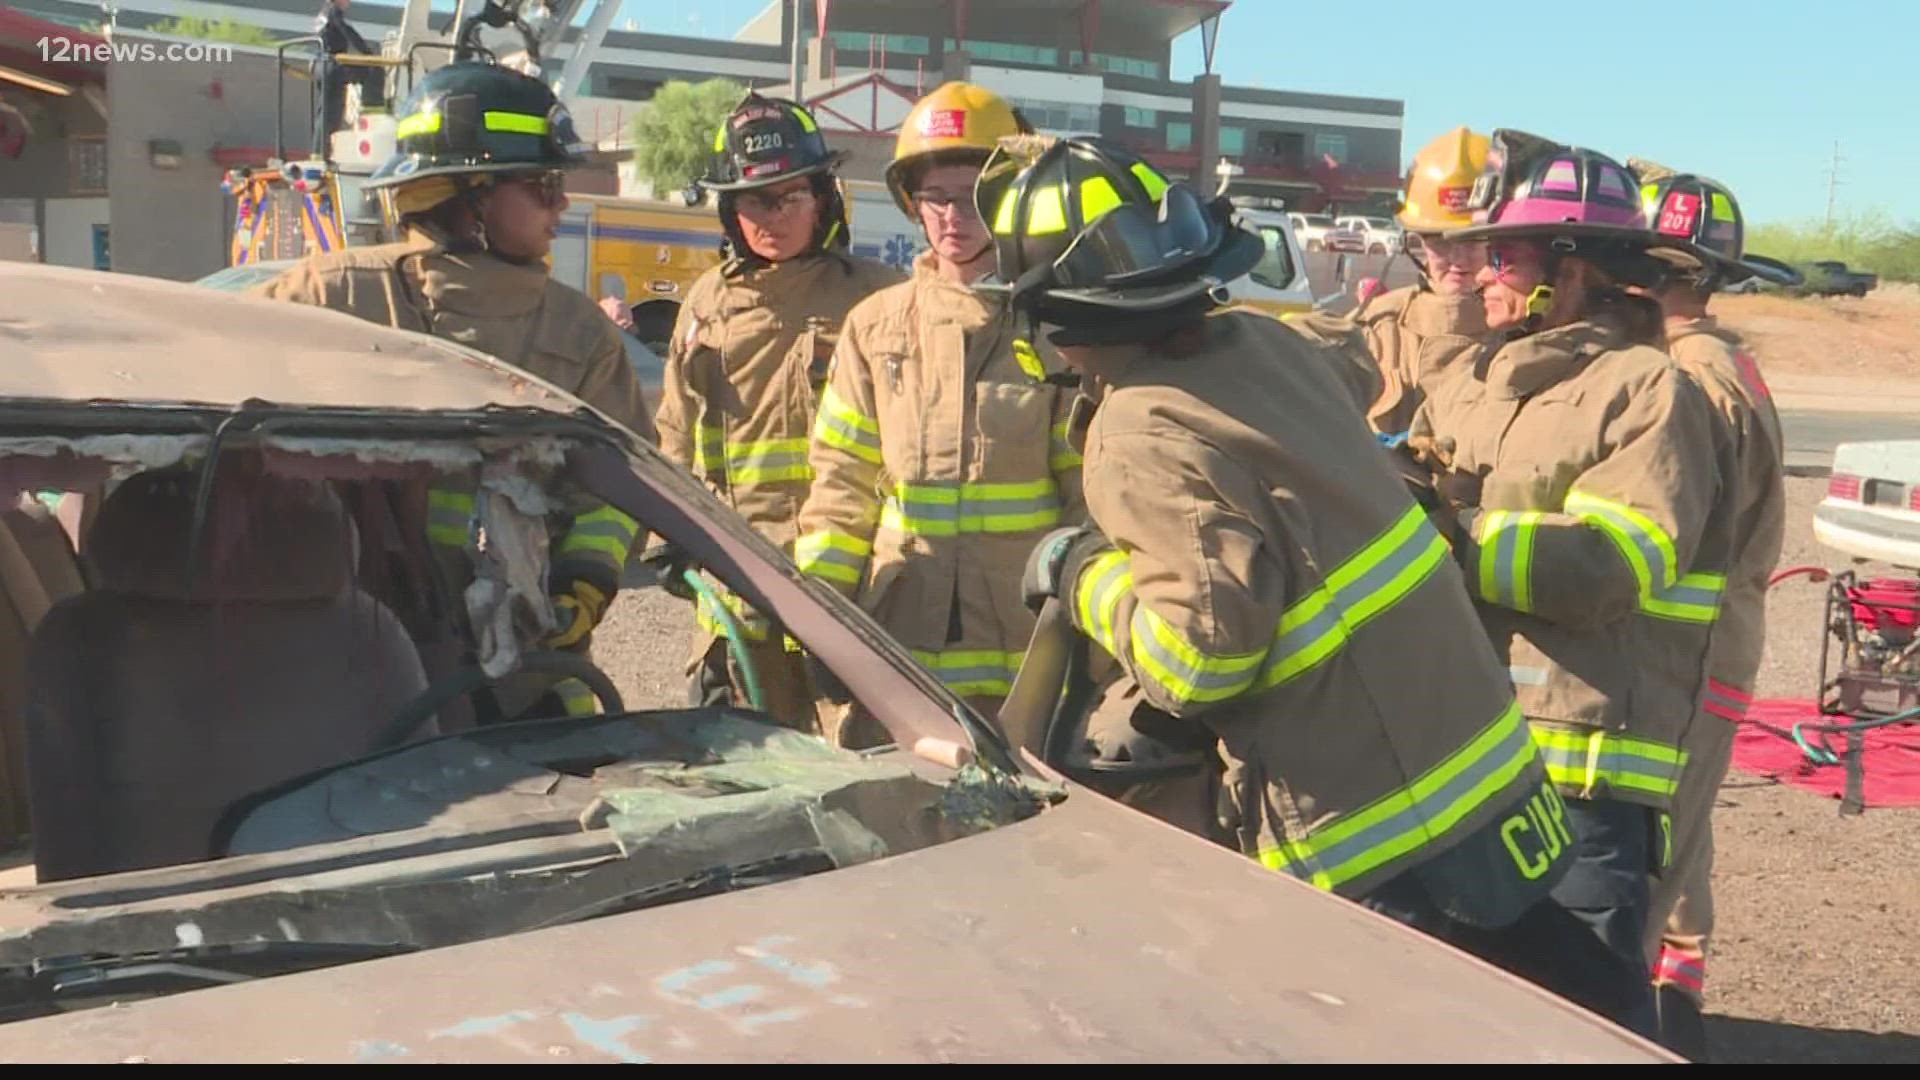 The gender gap is wide for both police officers and firefighters. Aspire Academy is hoping to narrow those gaps with its hands-on experience.